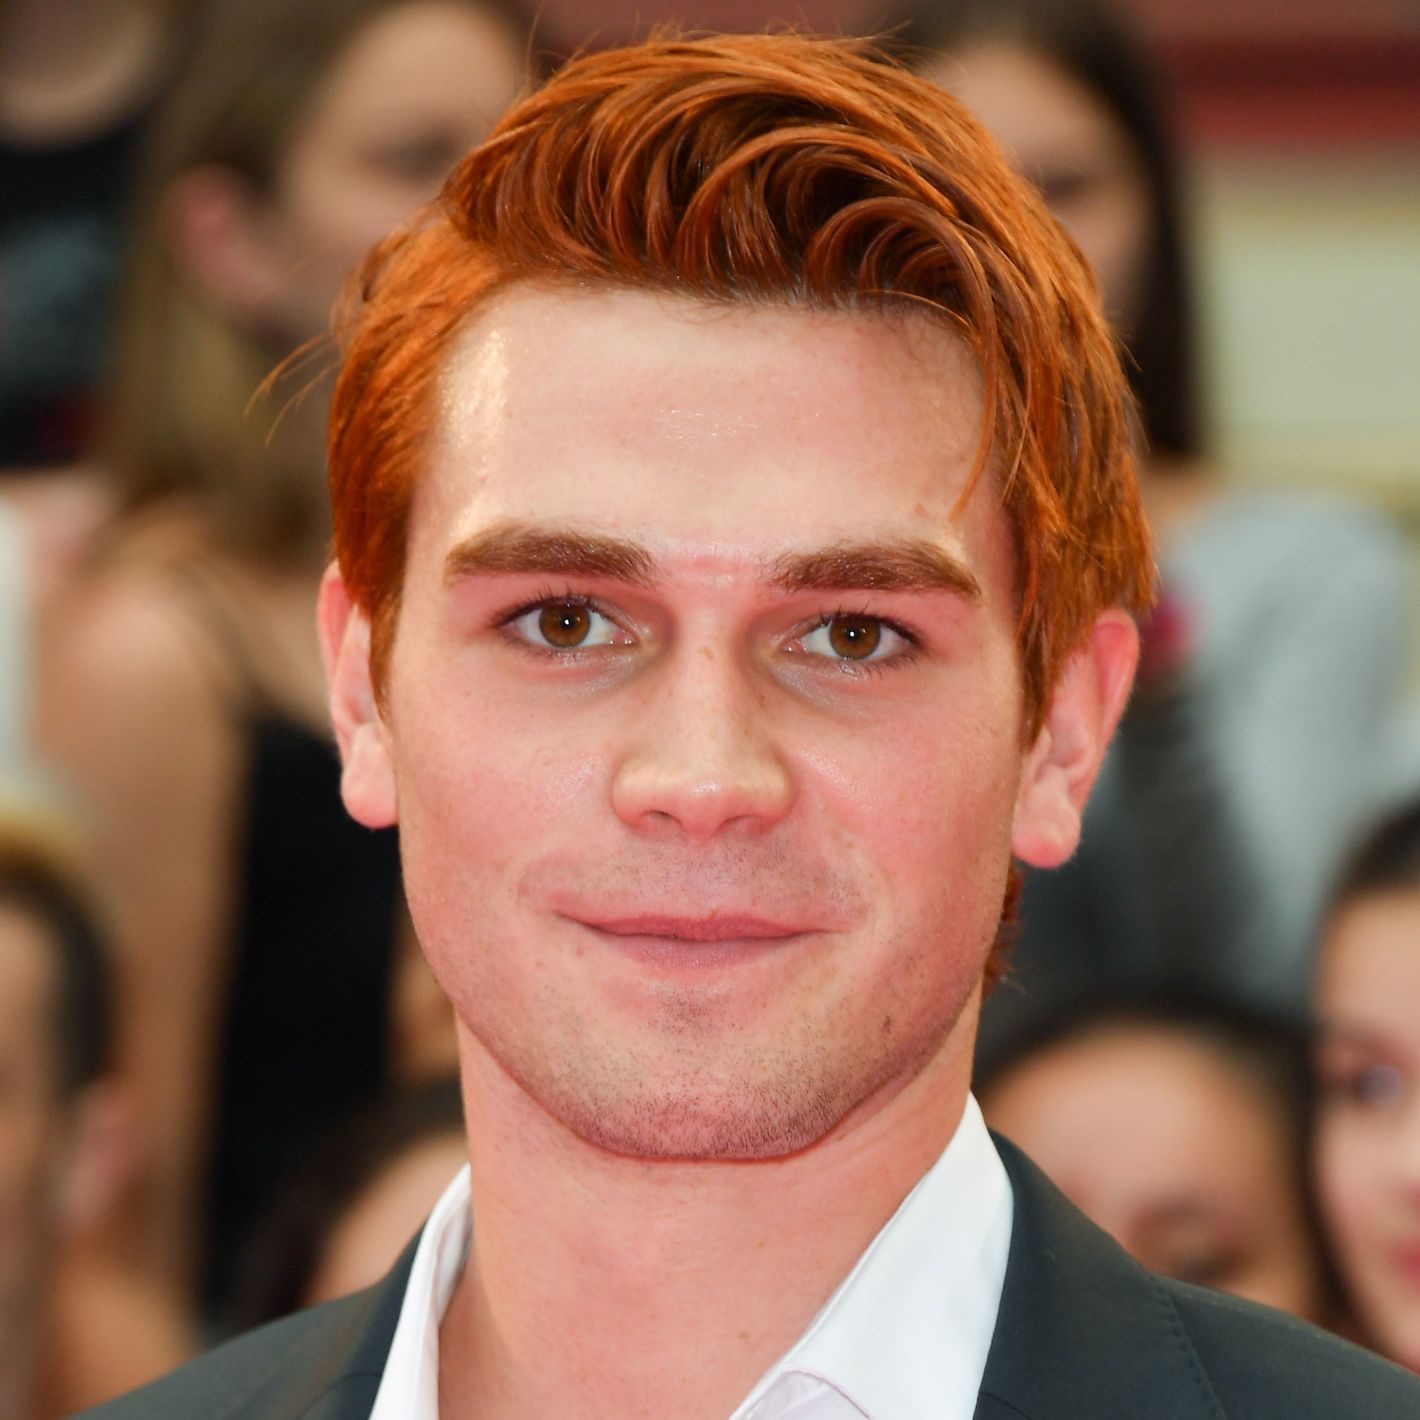 Has Hollywood Ever Seen A Redhead Before